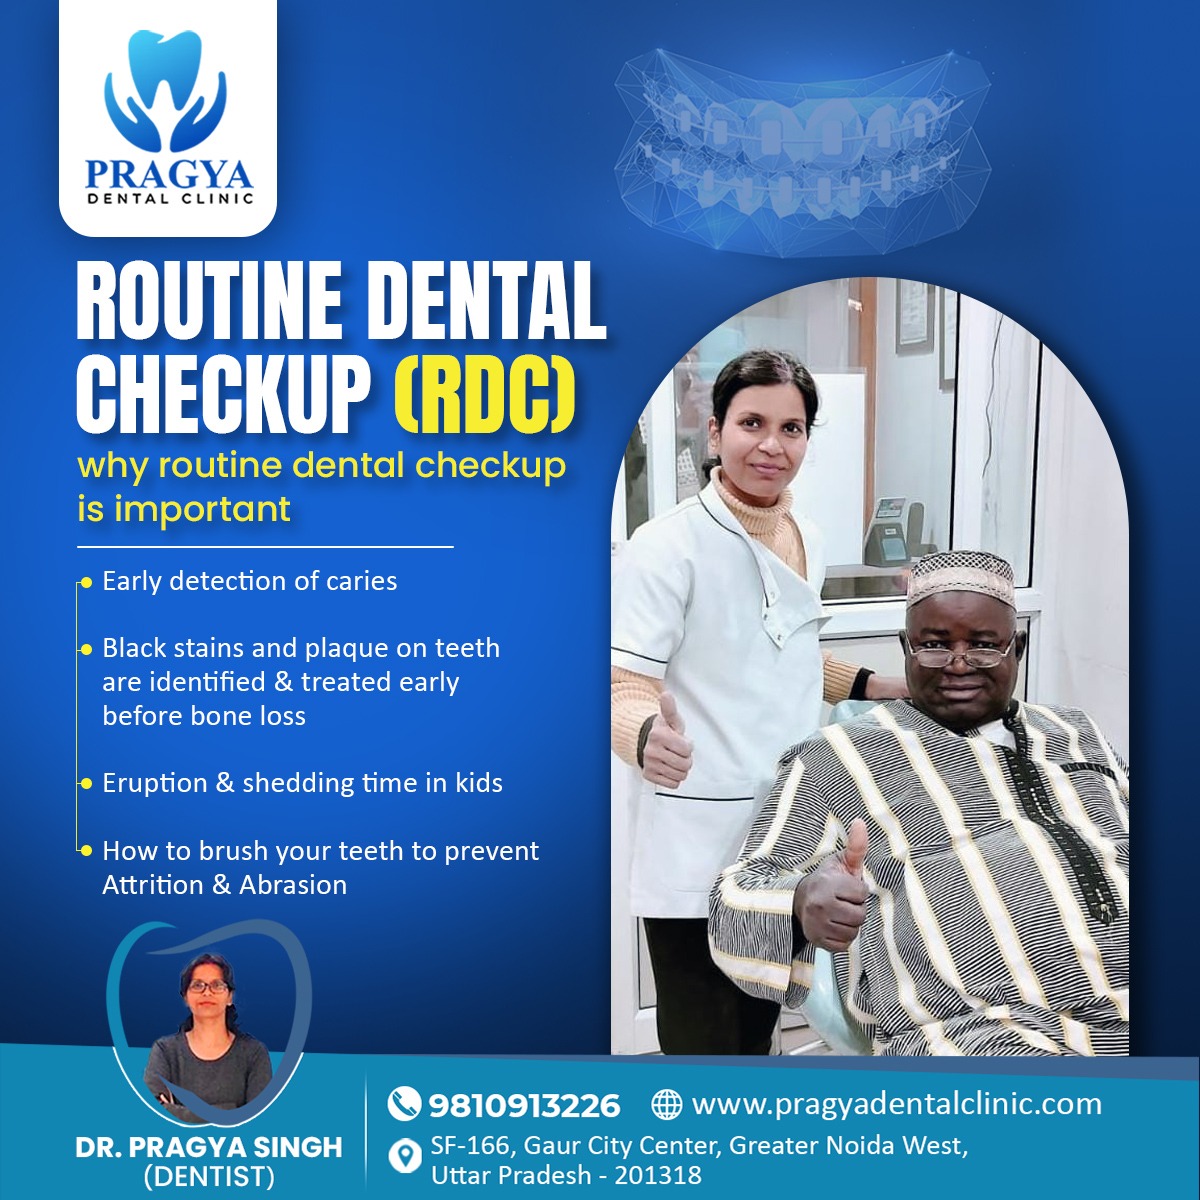 🌟 Keep your smile bright with Routine Dental Checkups (RDC)! Early detection of cavities and plaque buildup can prevent serious dental issues. Schedule your checkup today! 
.
.
visit: pragyadentalclinic.com
.
#RoutineDentalCheckup #DentalCheckup #OralHealth #DentalHygiene